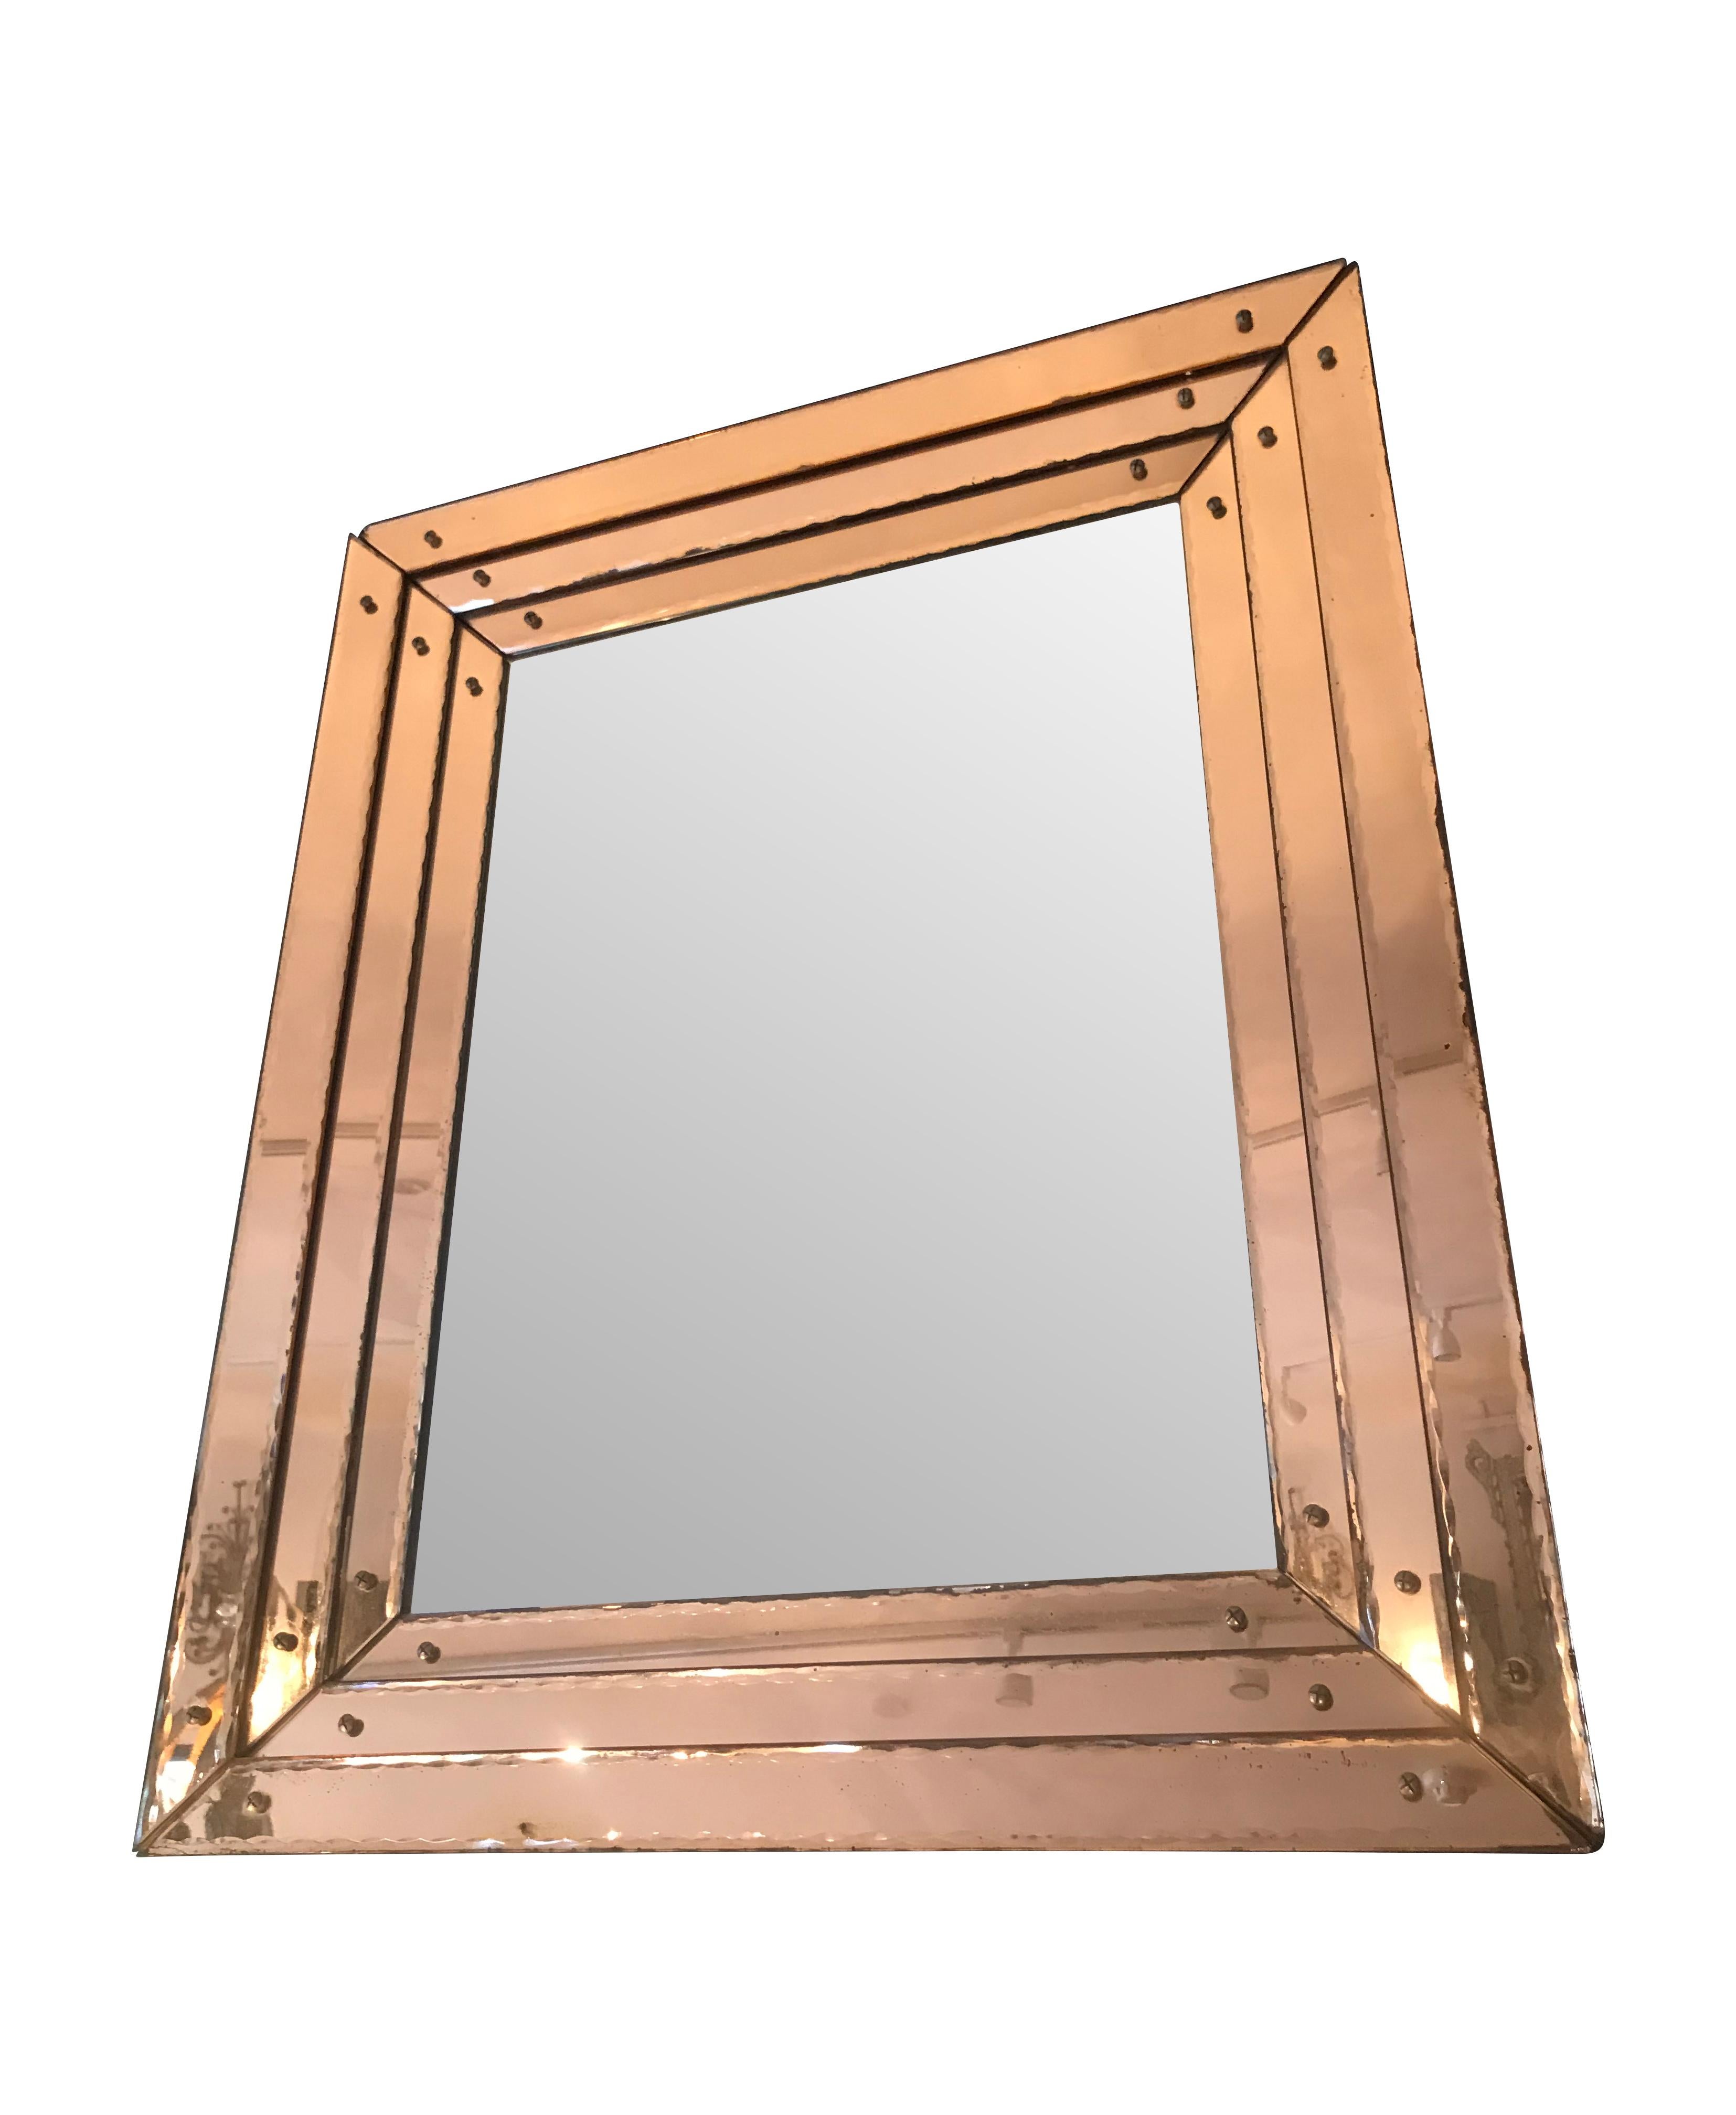 Faceted Art Deco Mirror with Rose Mirrored Surround